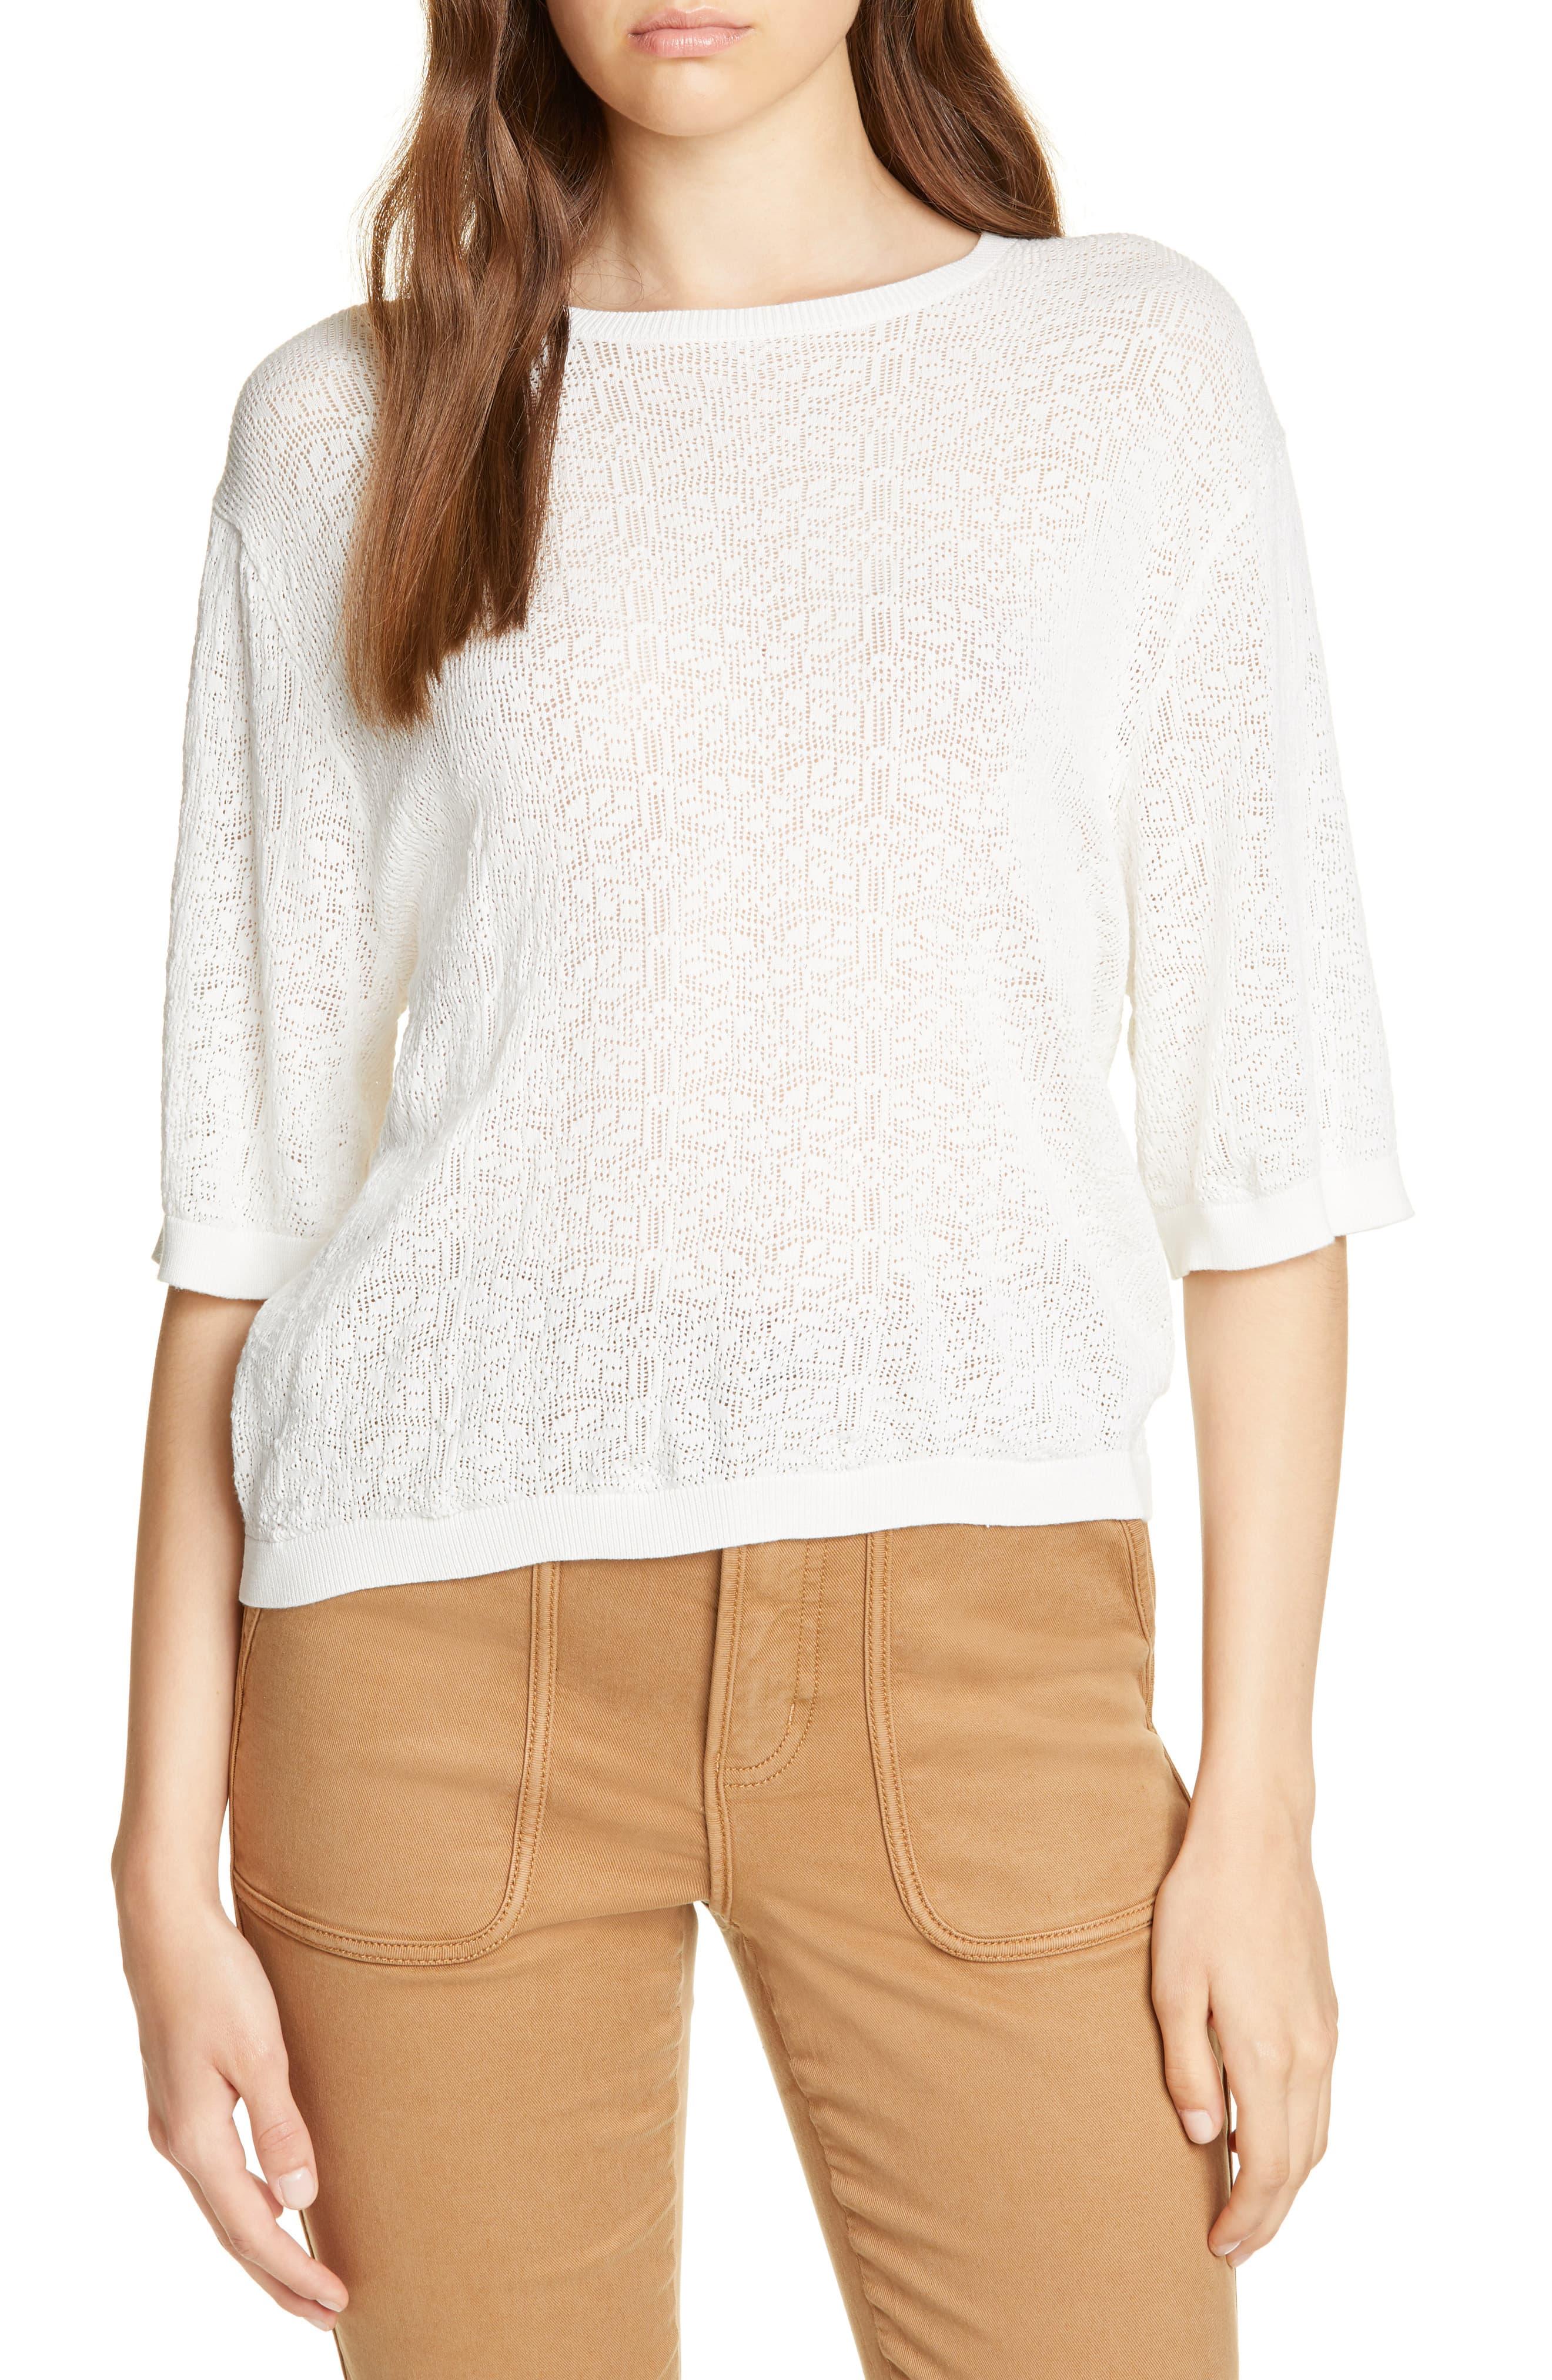 Joie Brikly Pointelle Sweater in White - Lyst